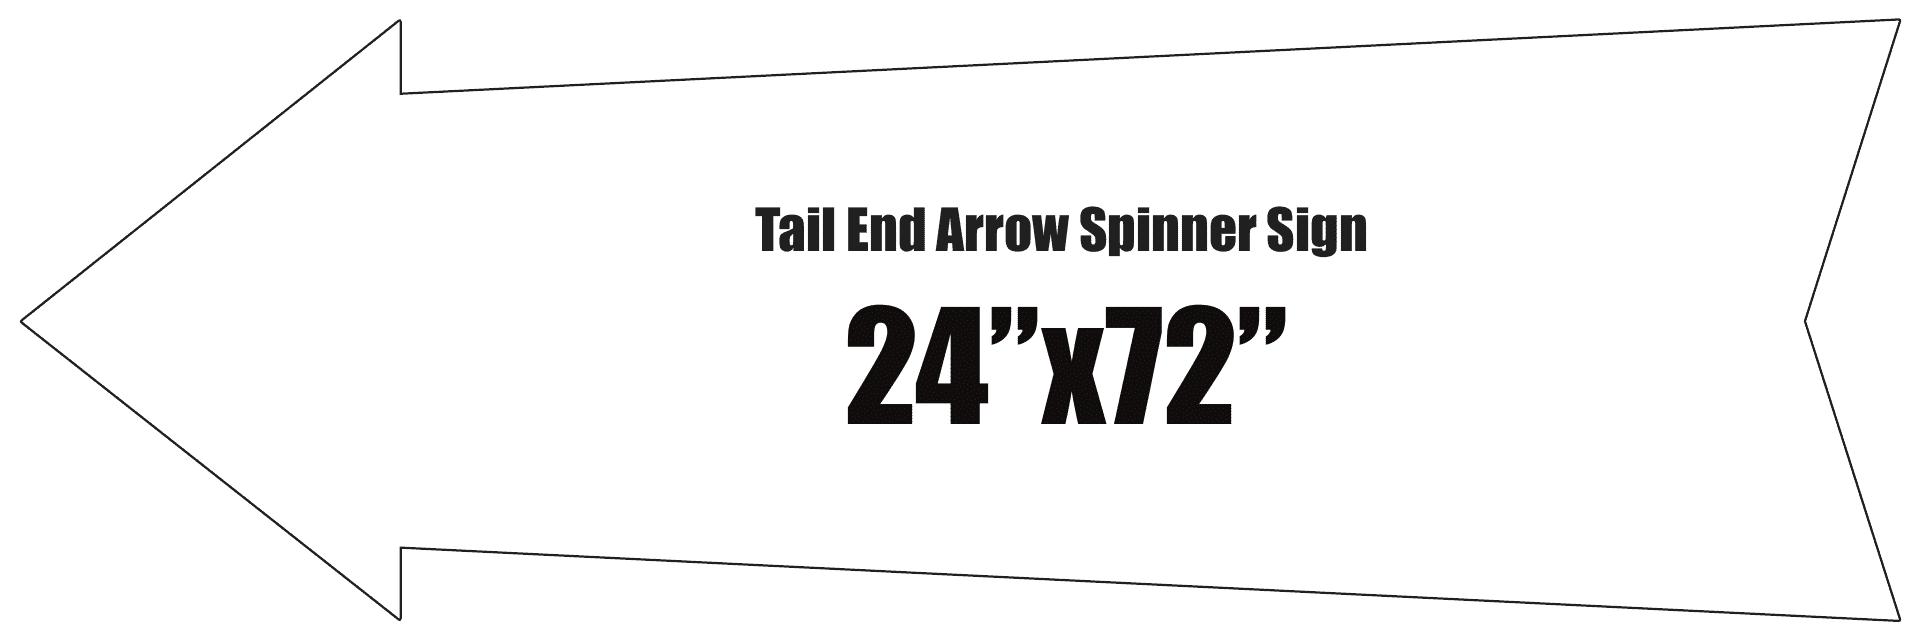 24"x72" Tail End Arrow Spinner Sign Template